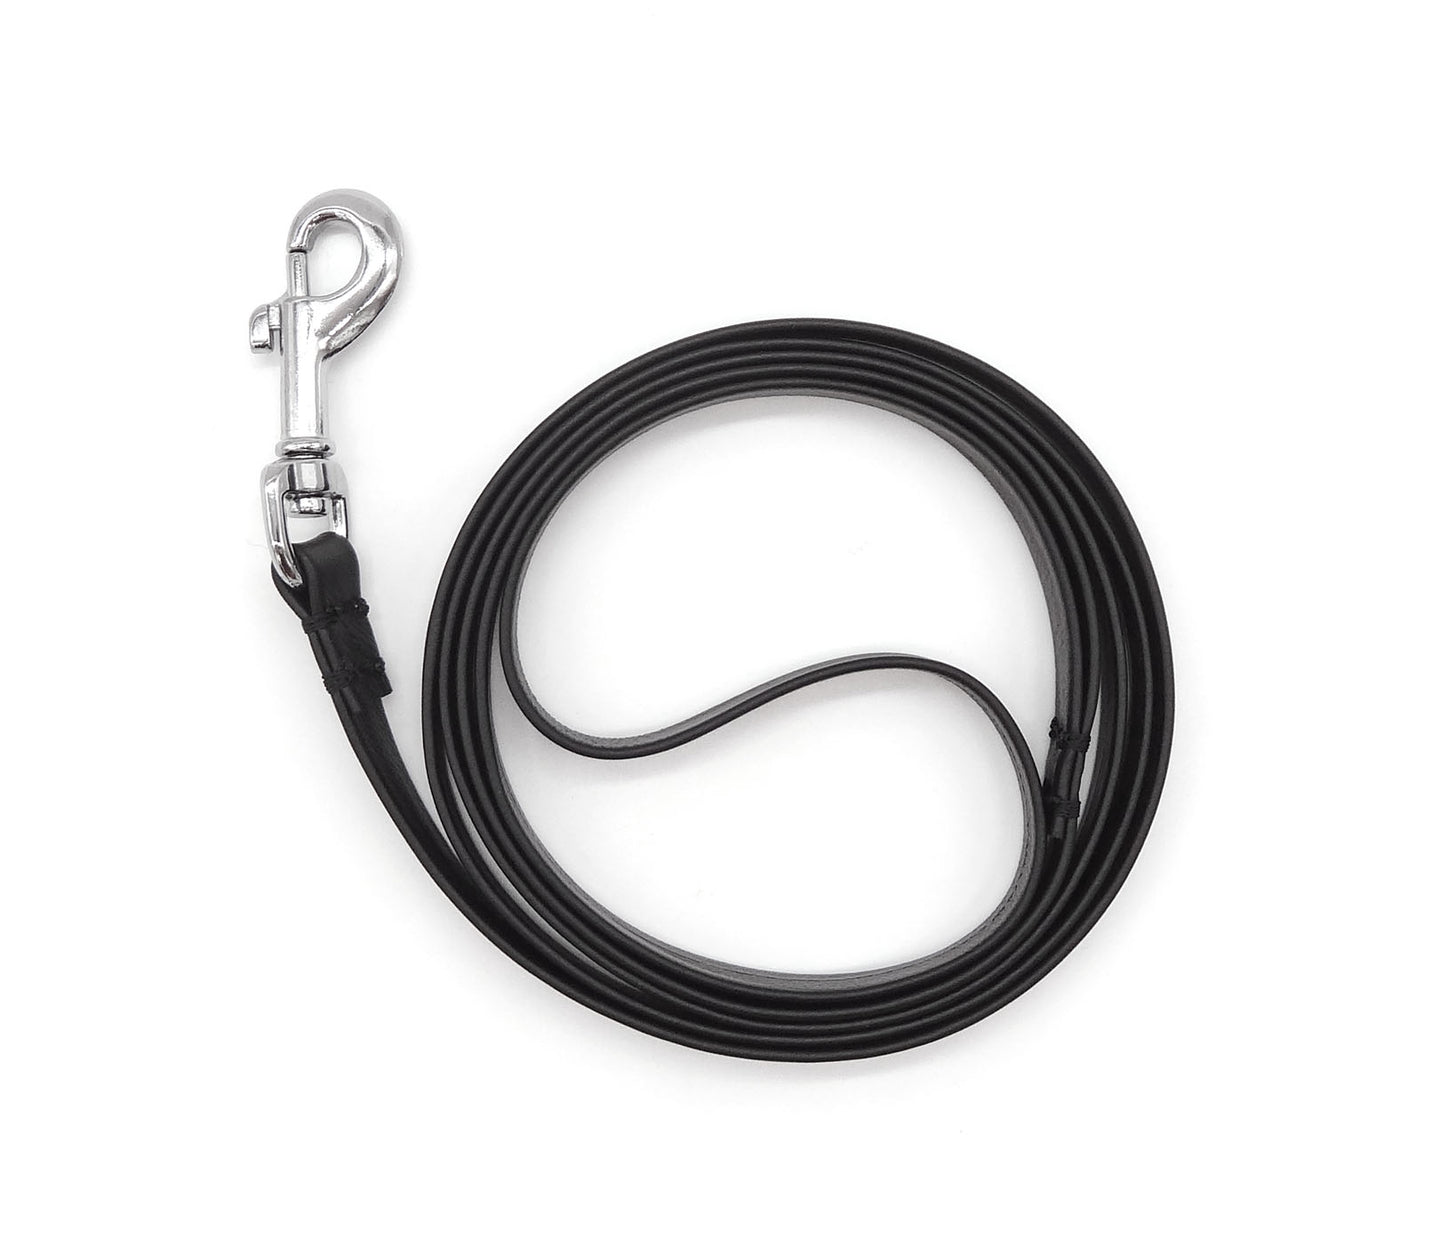 Puppy leash - for small four-legged friends and puppies